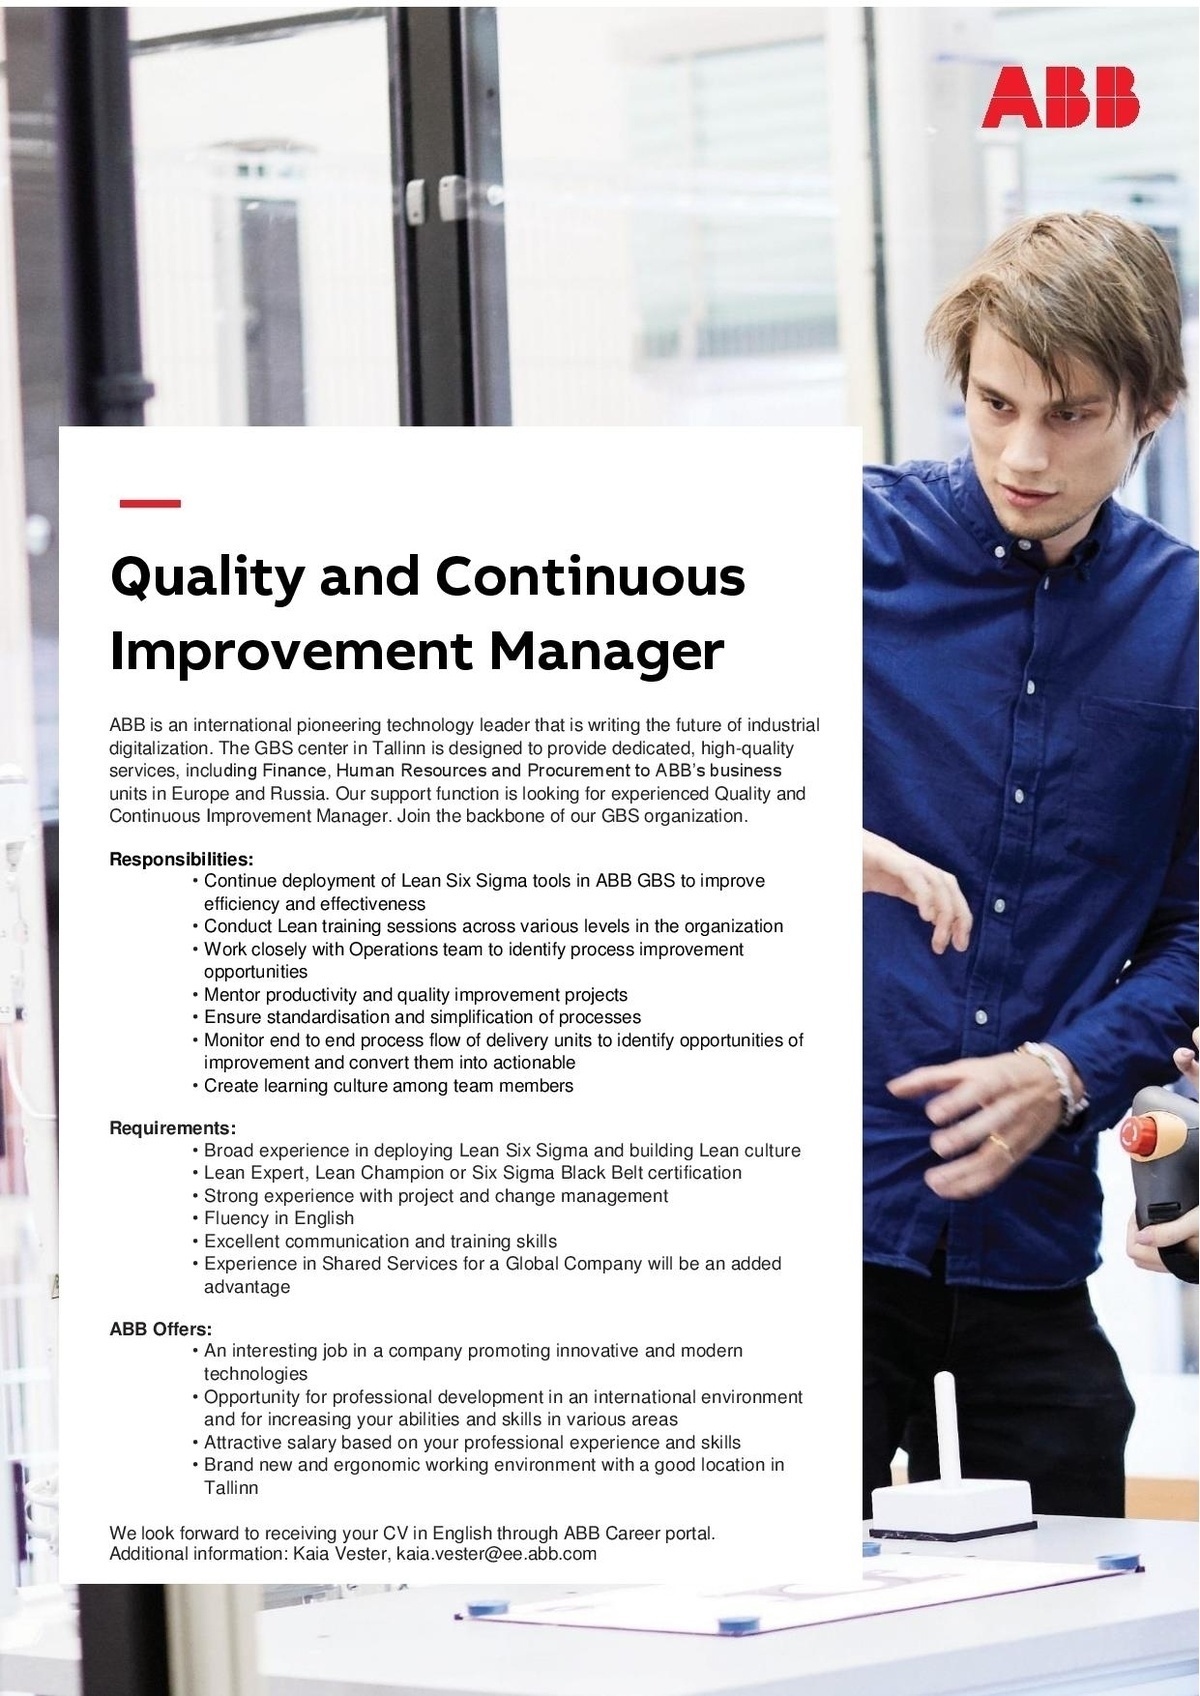 ABB AS Quality and Continuous Improvement Manager